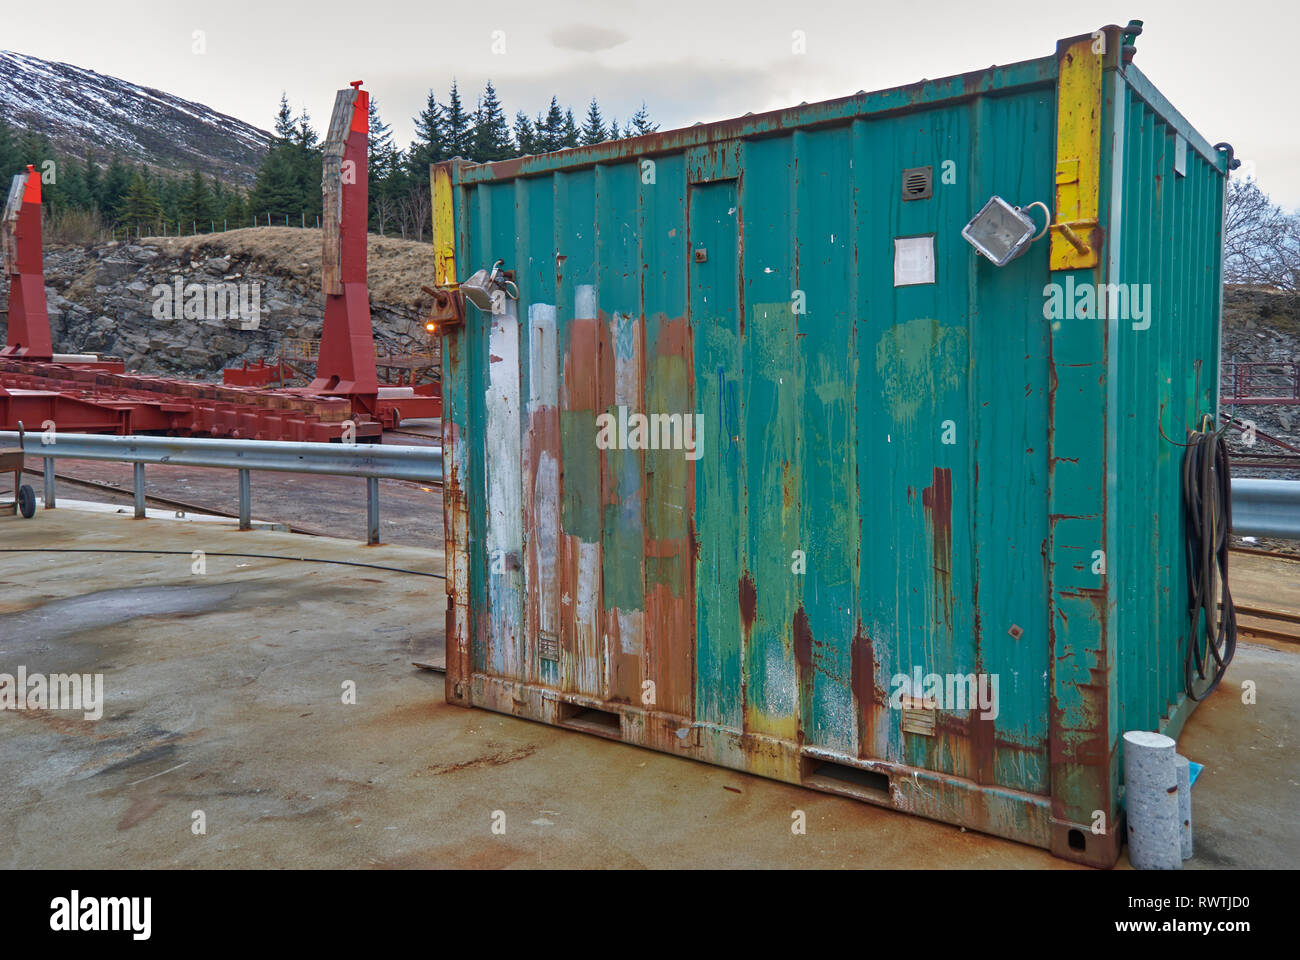 A 10' Shipping Container stored on the Quayside of the Dry Dock at Batybgg Shipyard in Maloy, Norway. Stock Photo